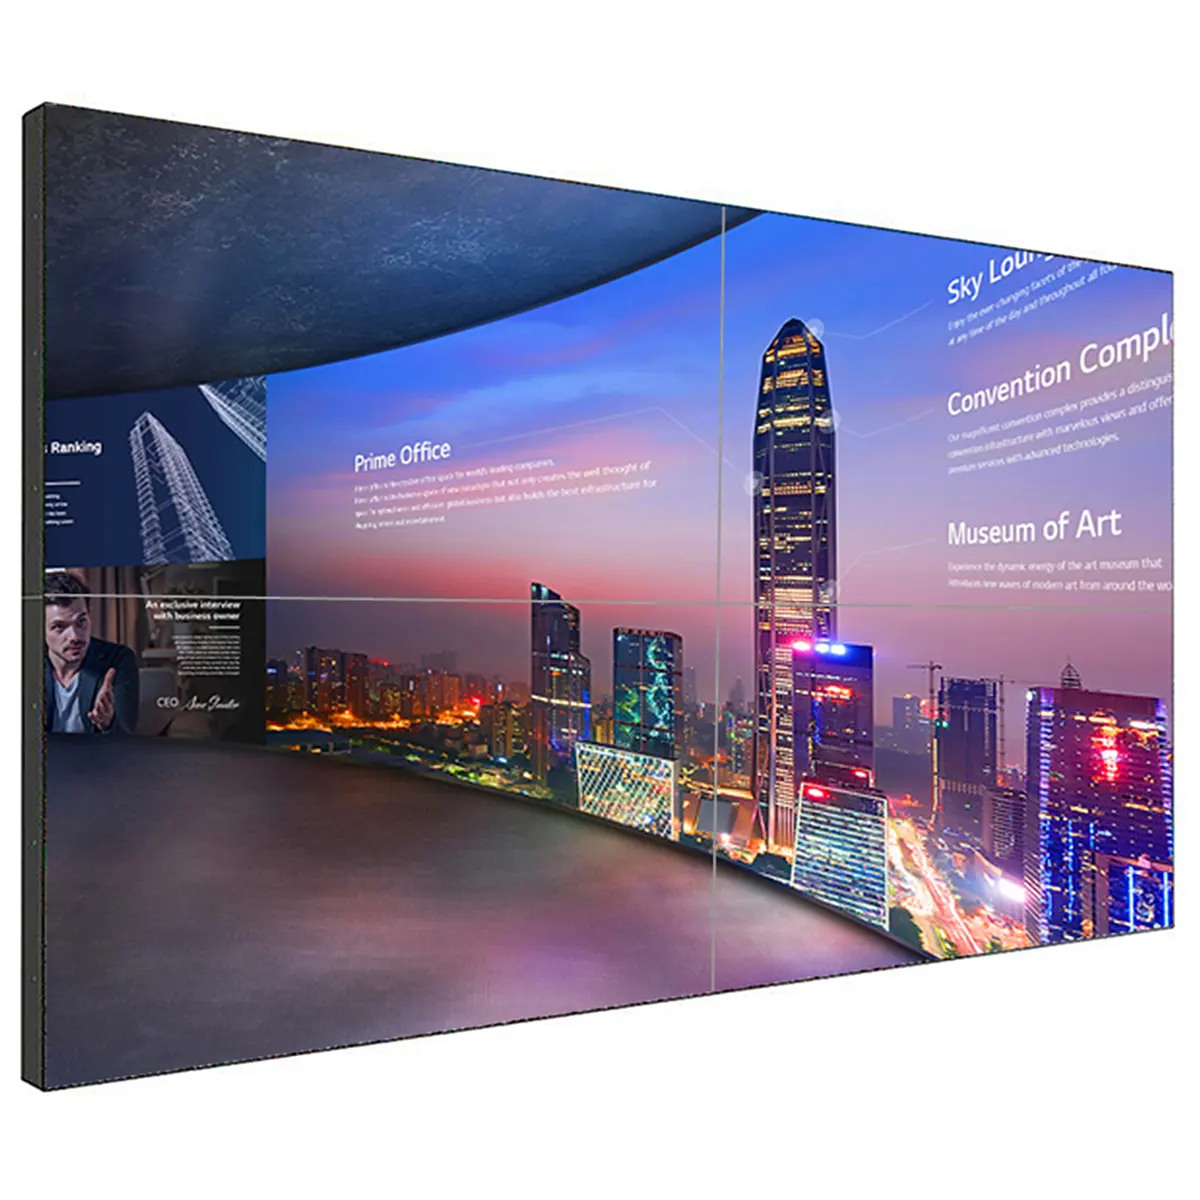 55Inch 3x3 Narrow Bezel LCD Video Wall Price Display Splice Screen Panel Monitor Controller Digital signage Advertise videowall